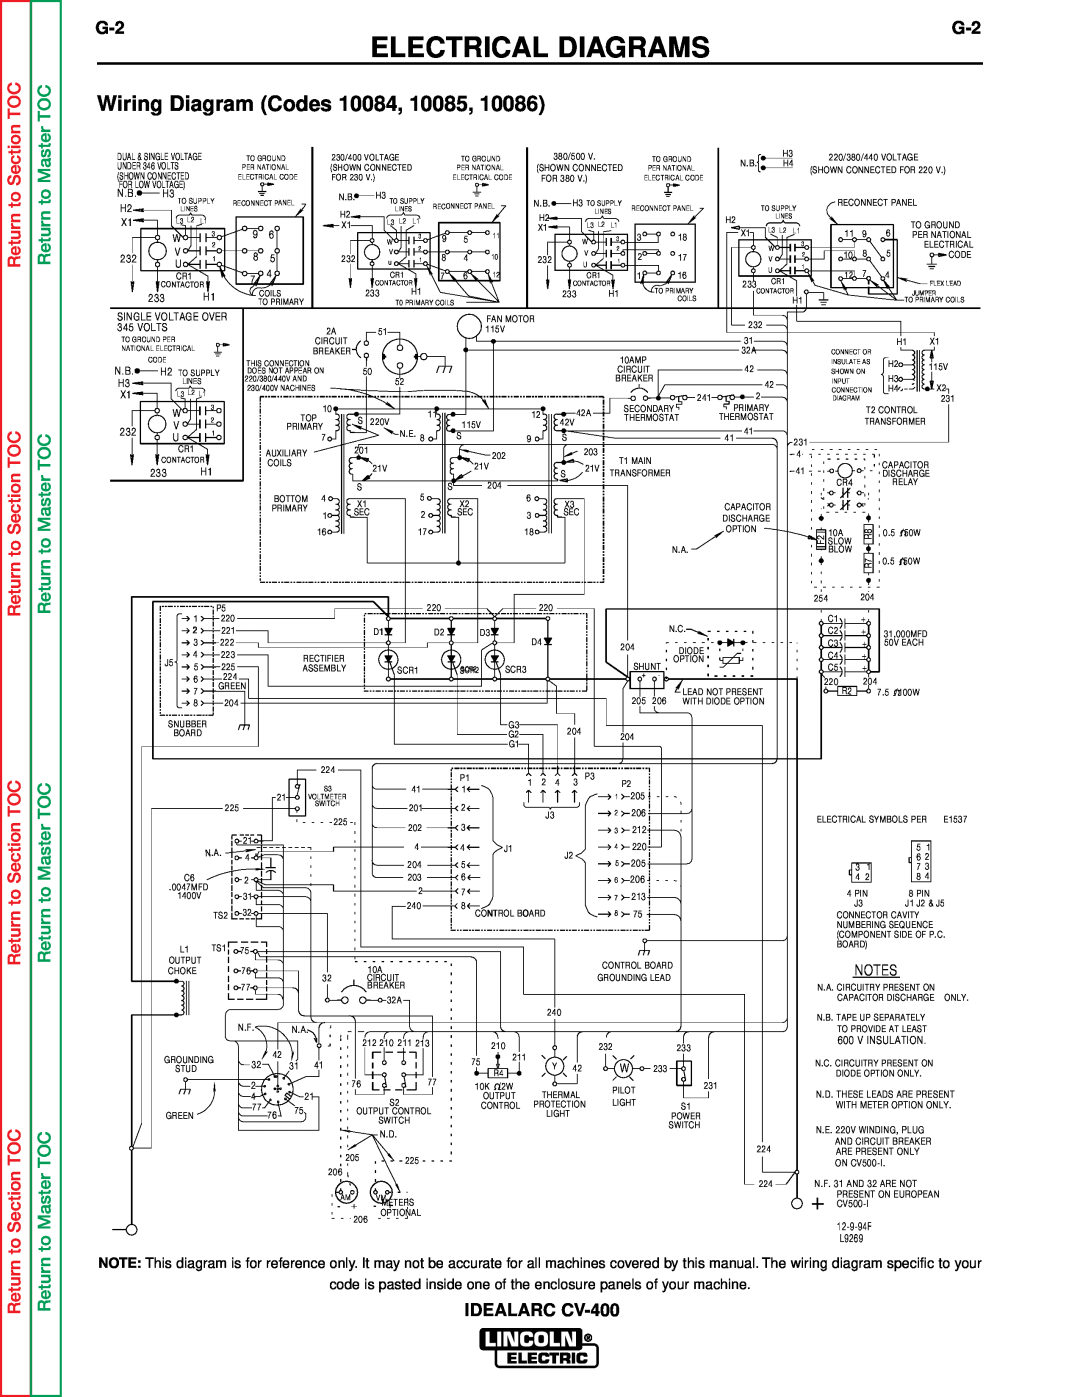 Lincoln Electric SVM136-A Wiring Diagram Codes 10084, 10085, Electrical Diagrams, Return to Section, Return to Master 